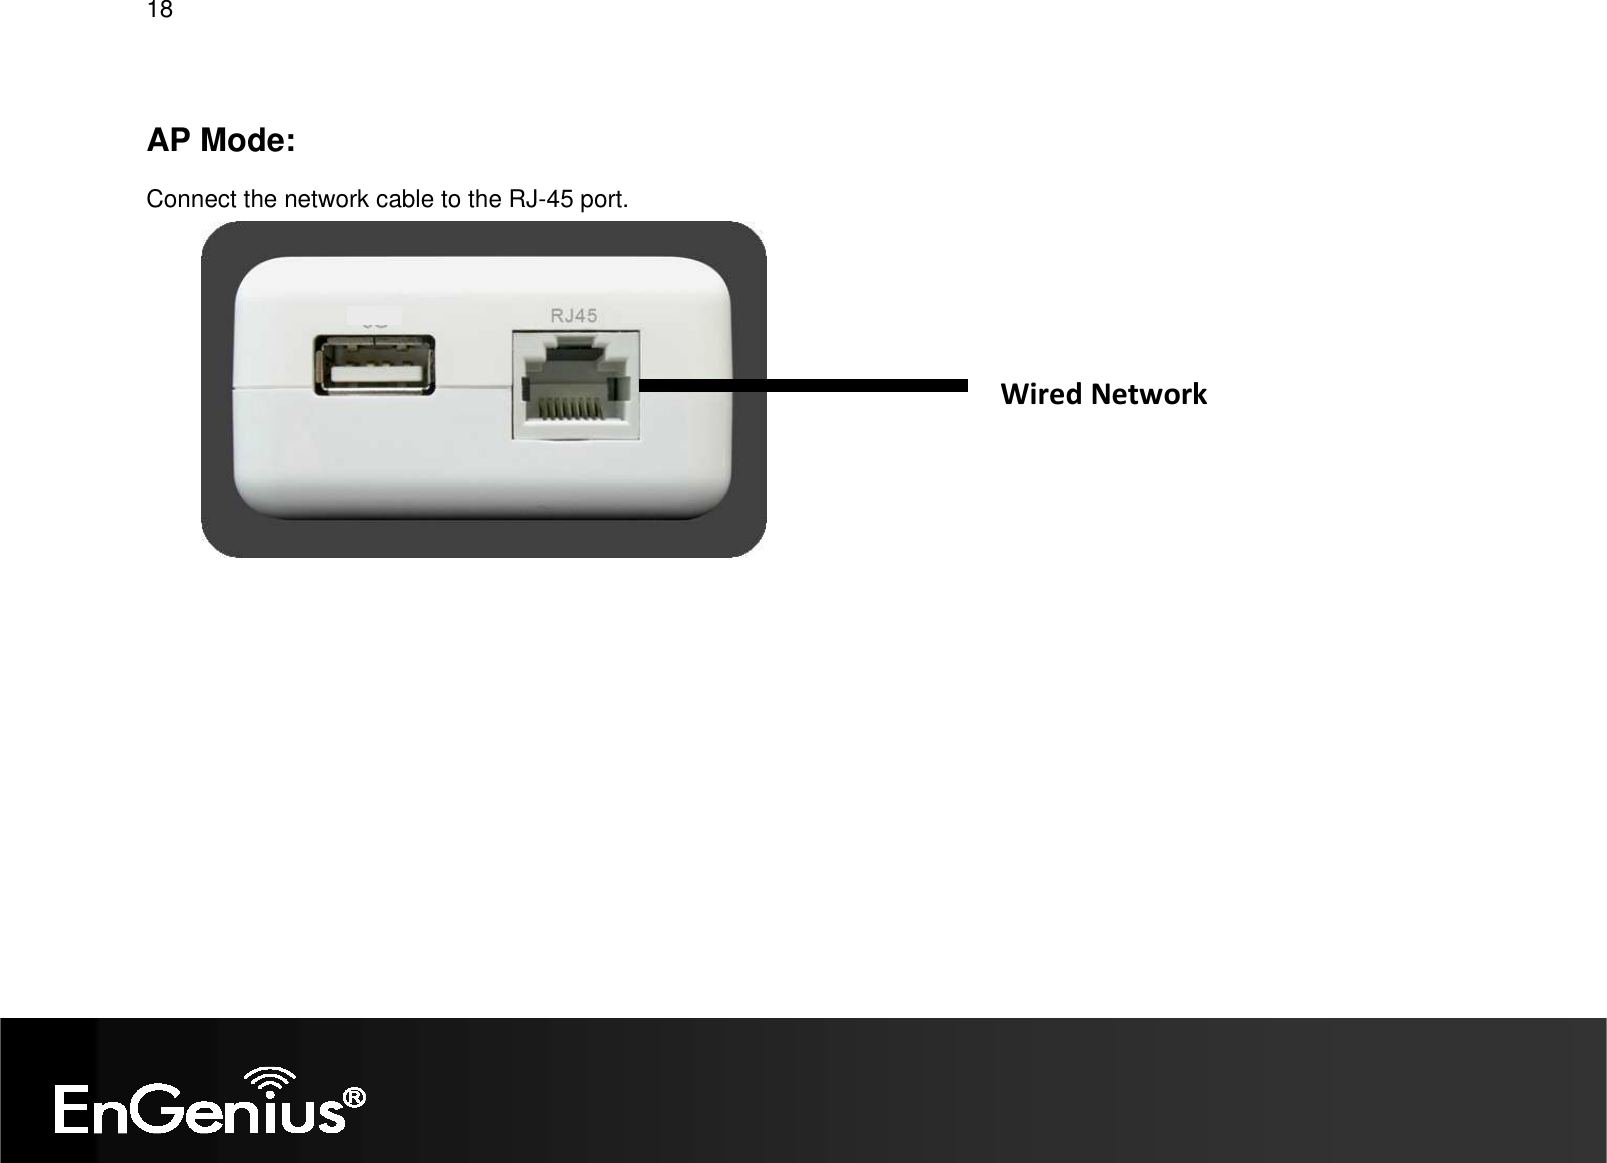   18  AP Mode:  Connect the network cable to the RJ-45 port.         Wired Network 